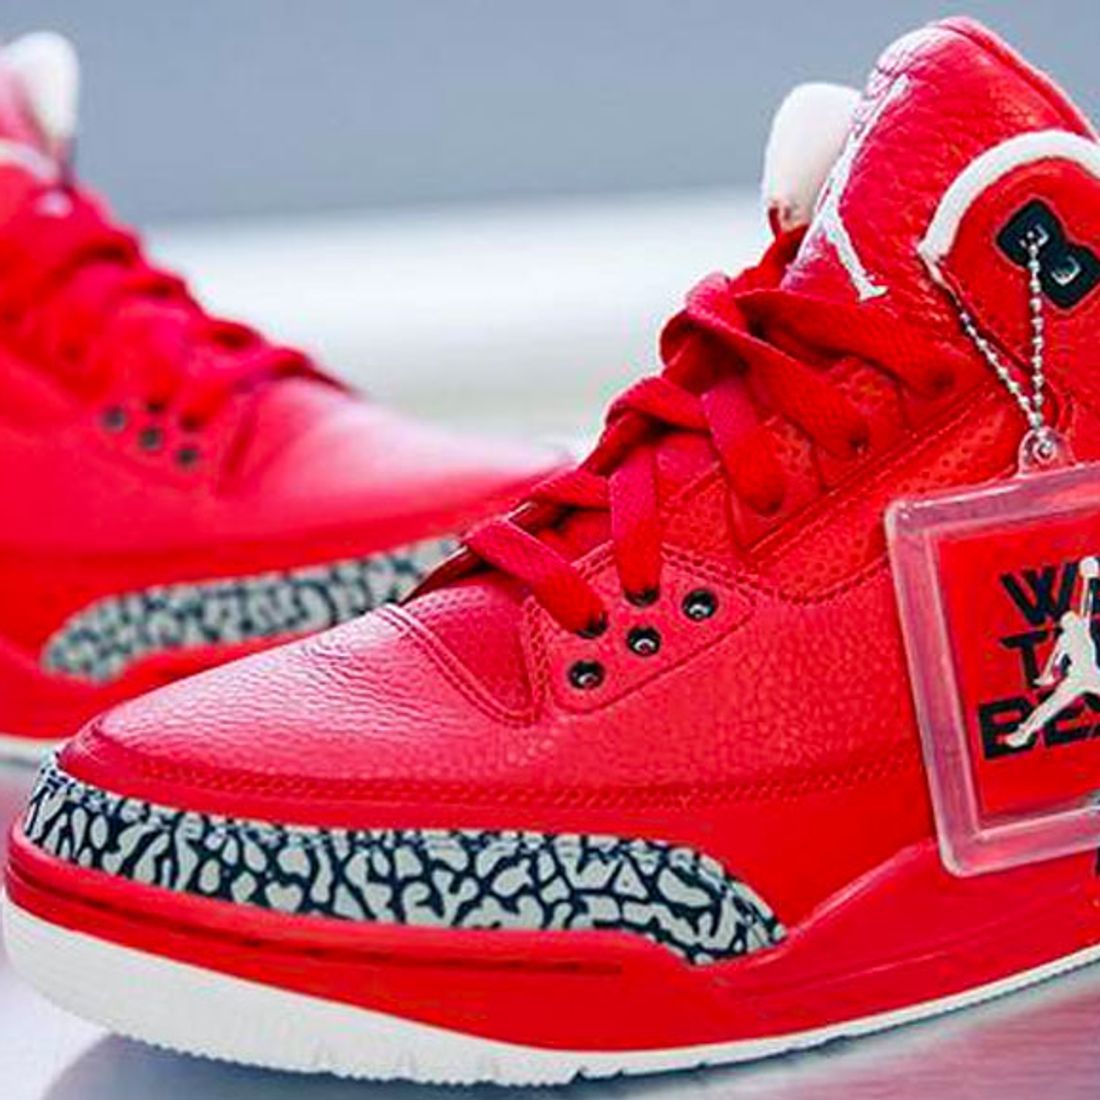 The 10 Most Insanely Expensive Sneakers of the Decade - Sneaker Freaker